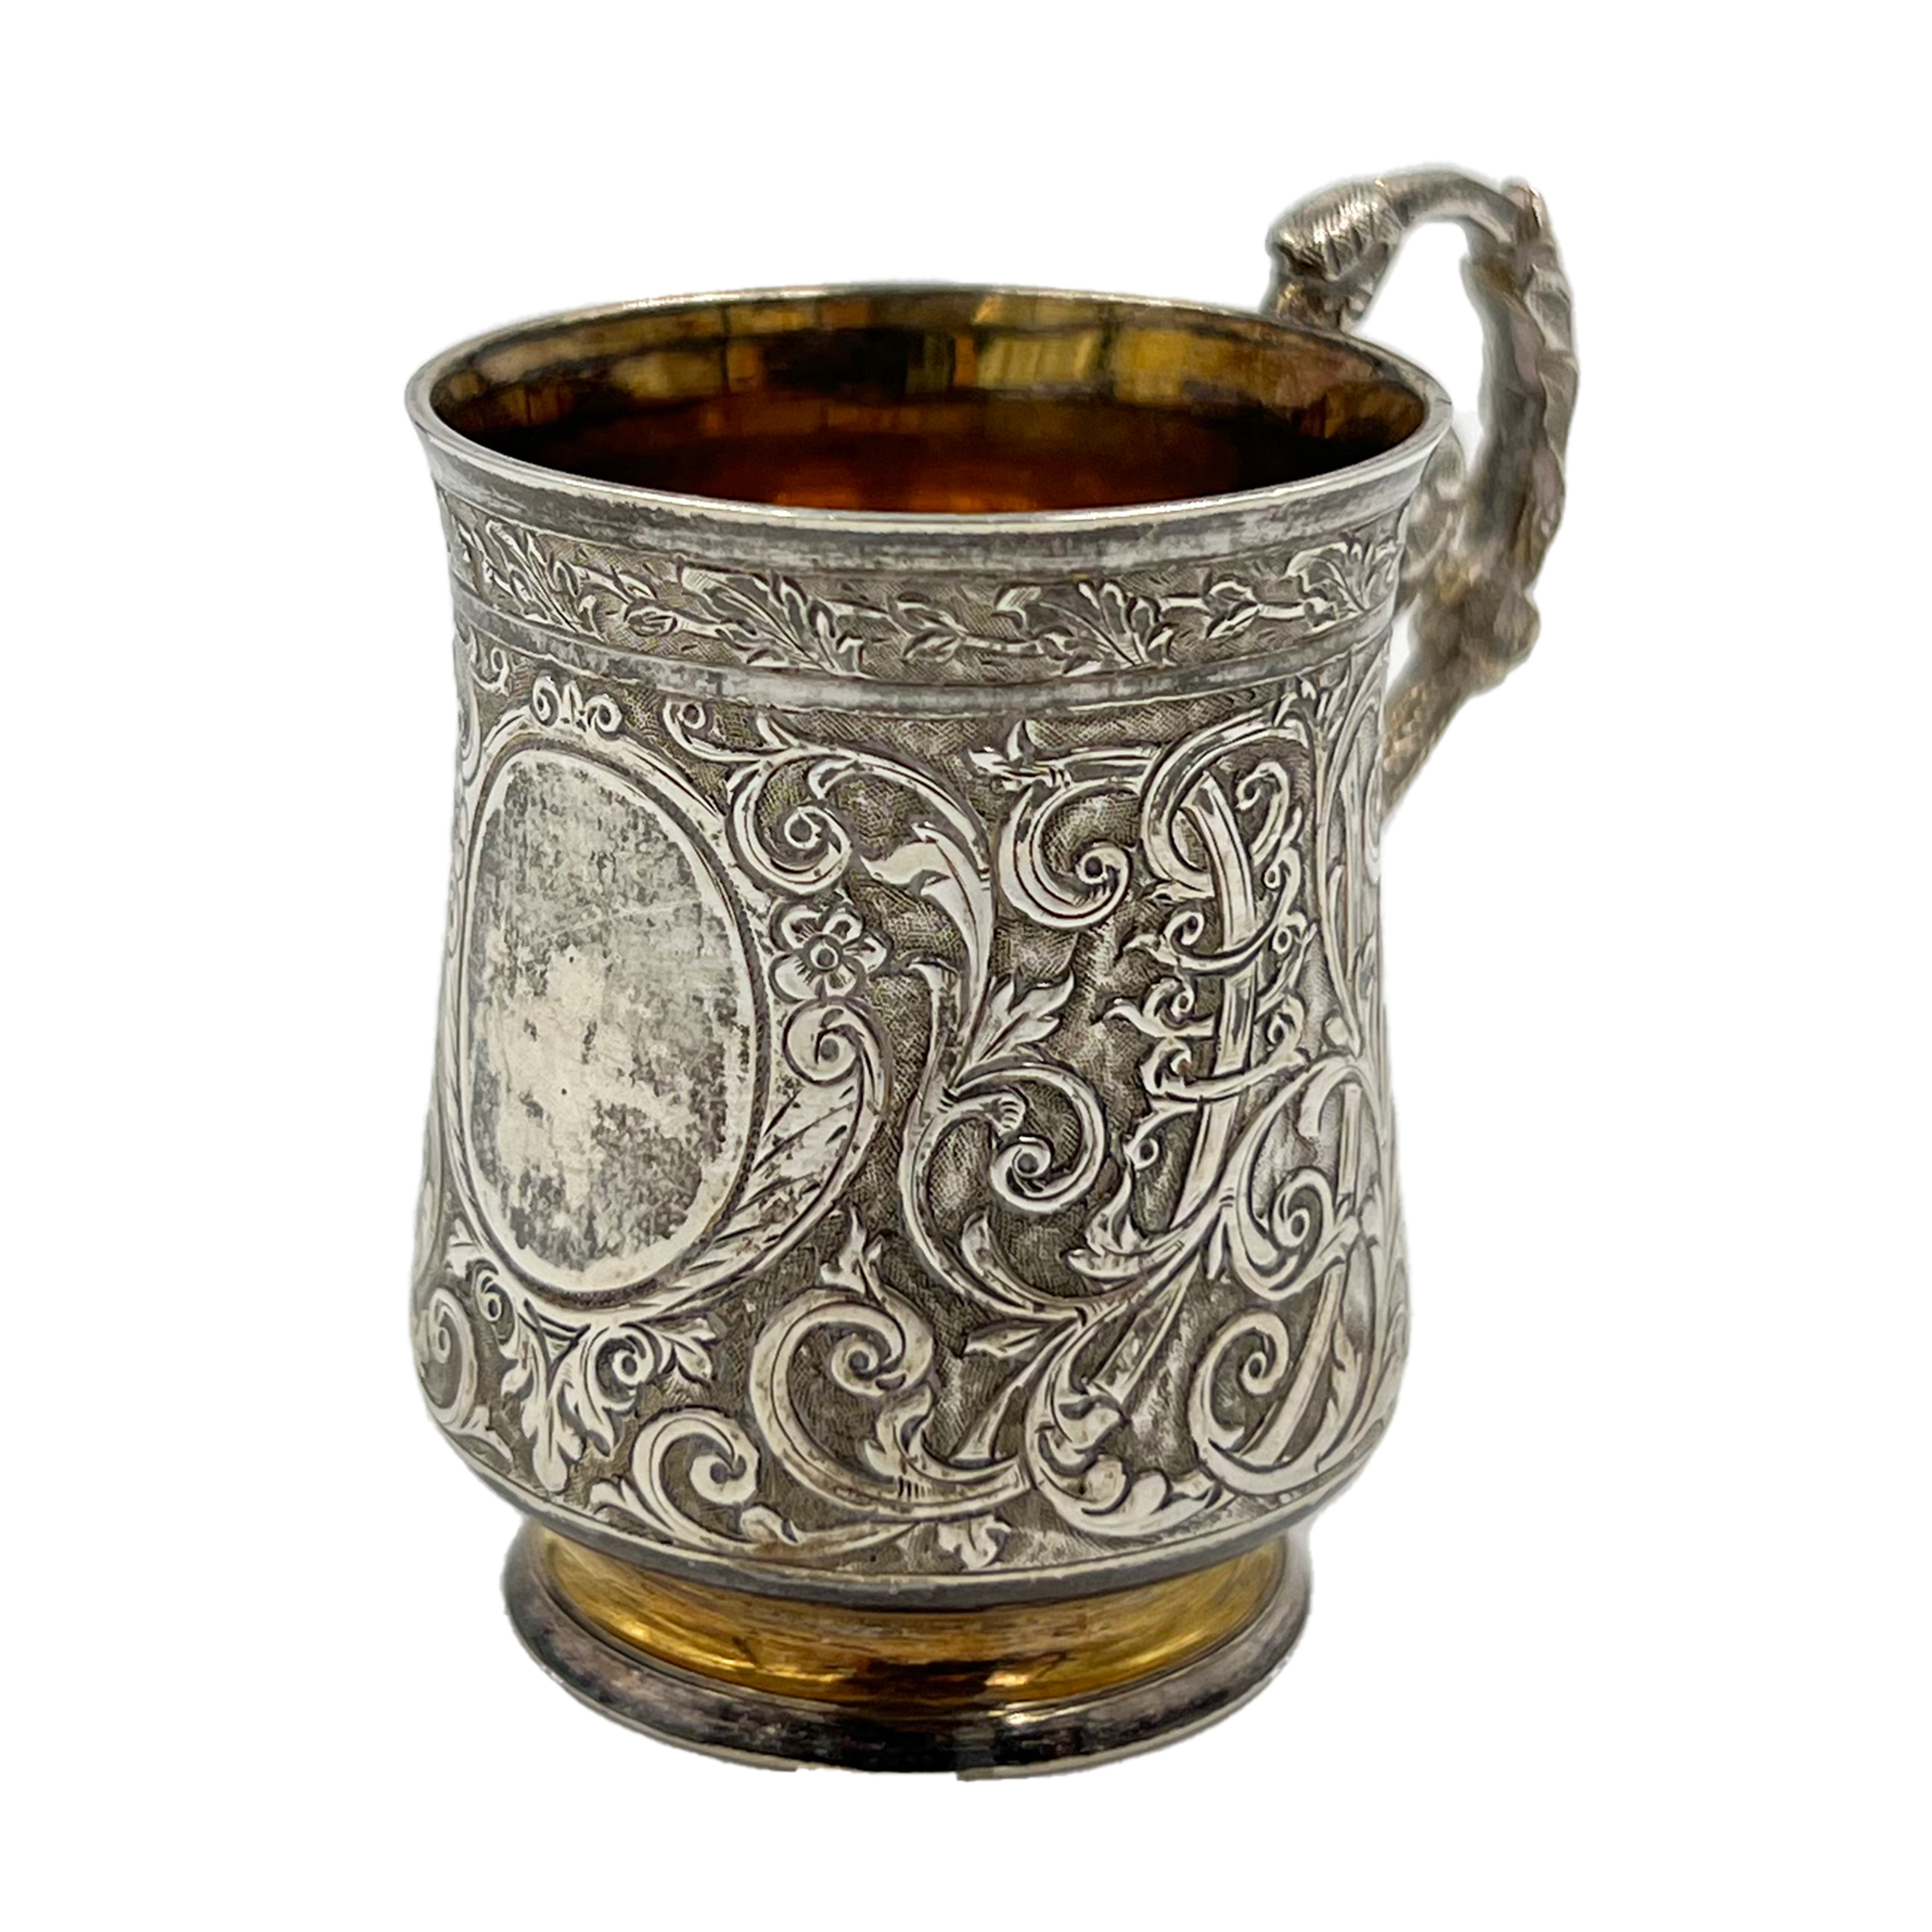 A MINIATURE SILVER TANKARD WITH EXTENSIVE EMBOSSED DECORATION, FRENCH, EARLY 20TH CENTURY